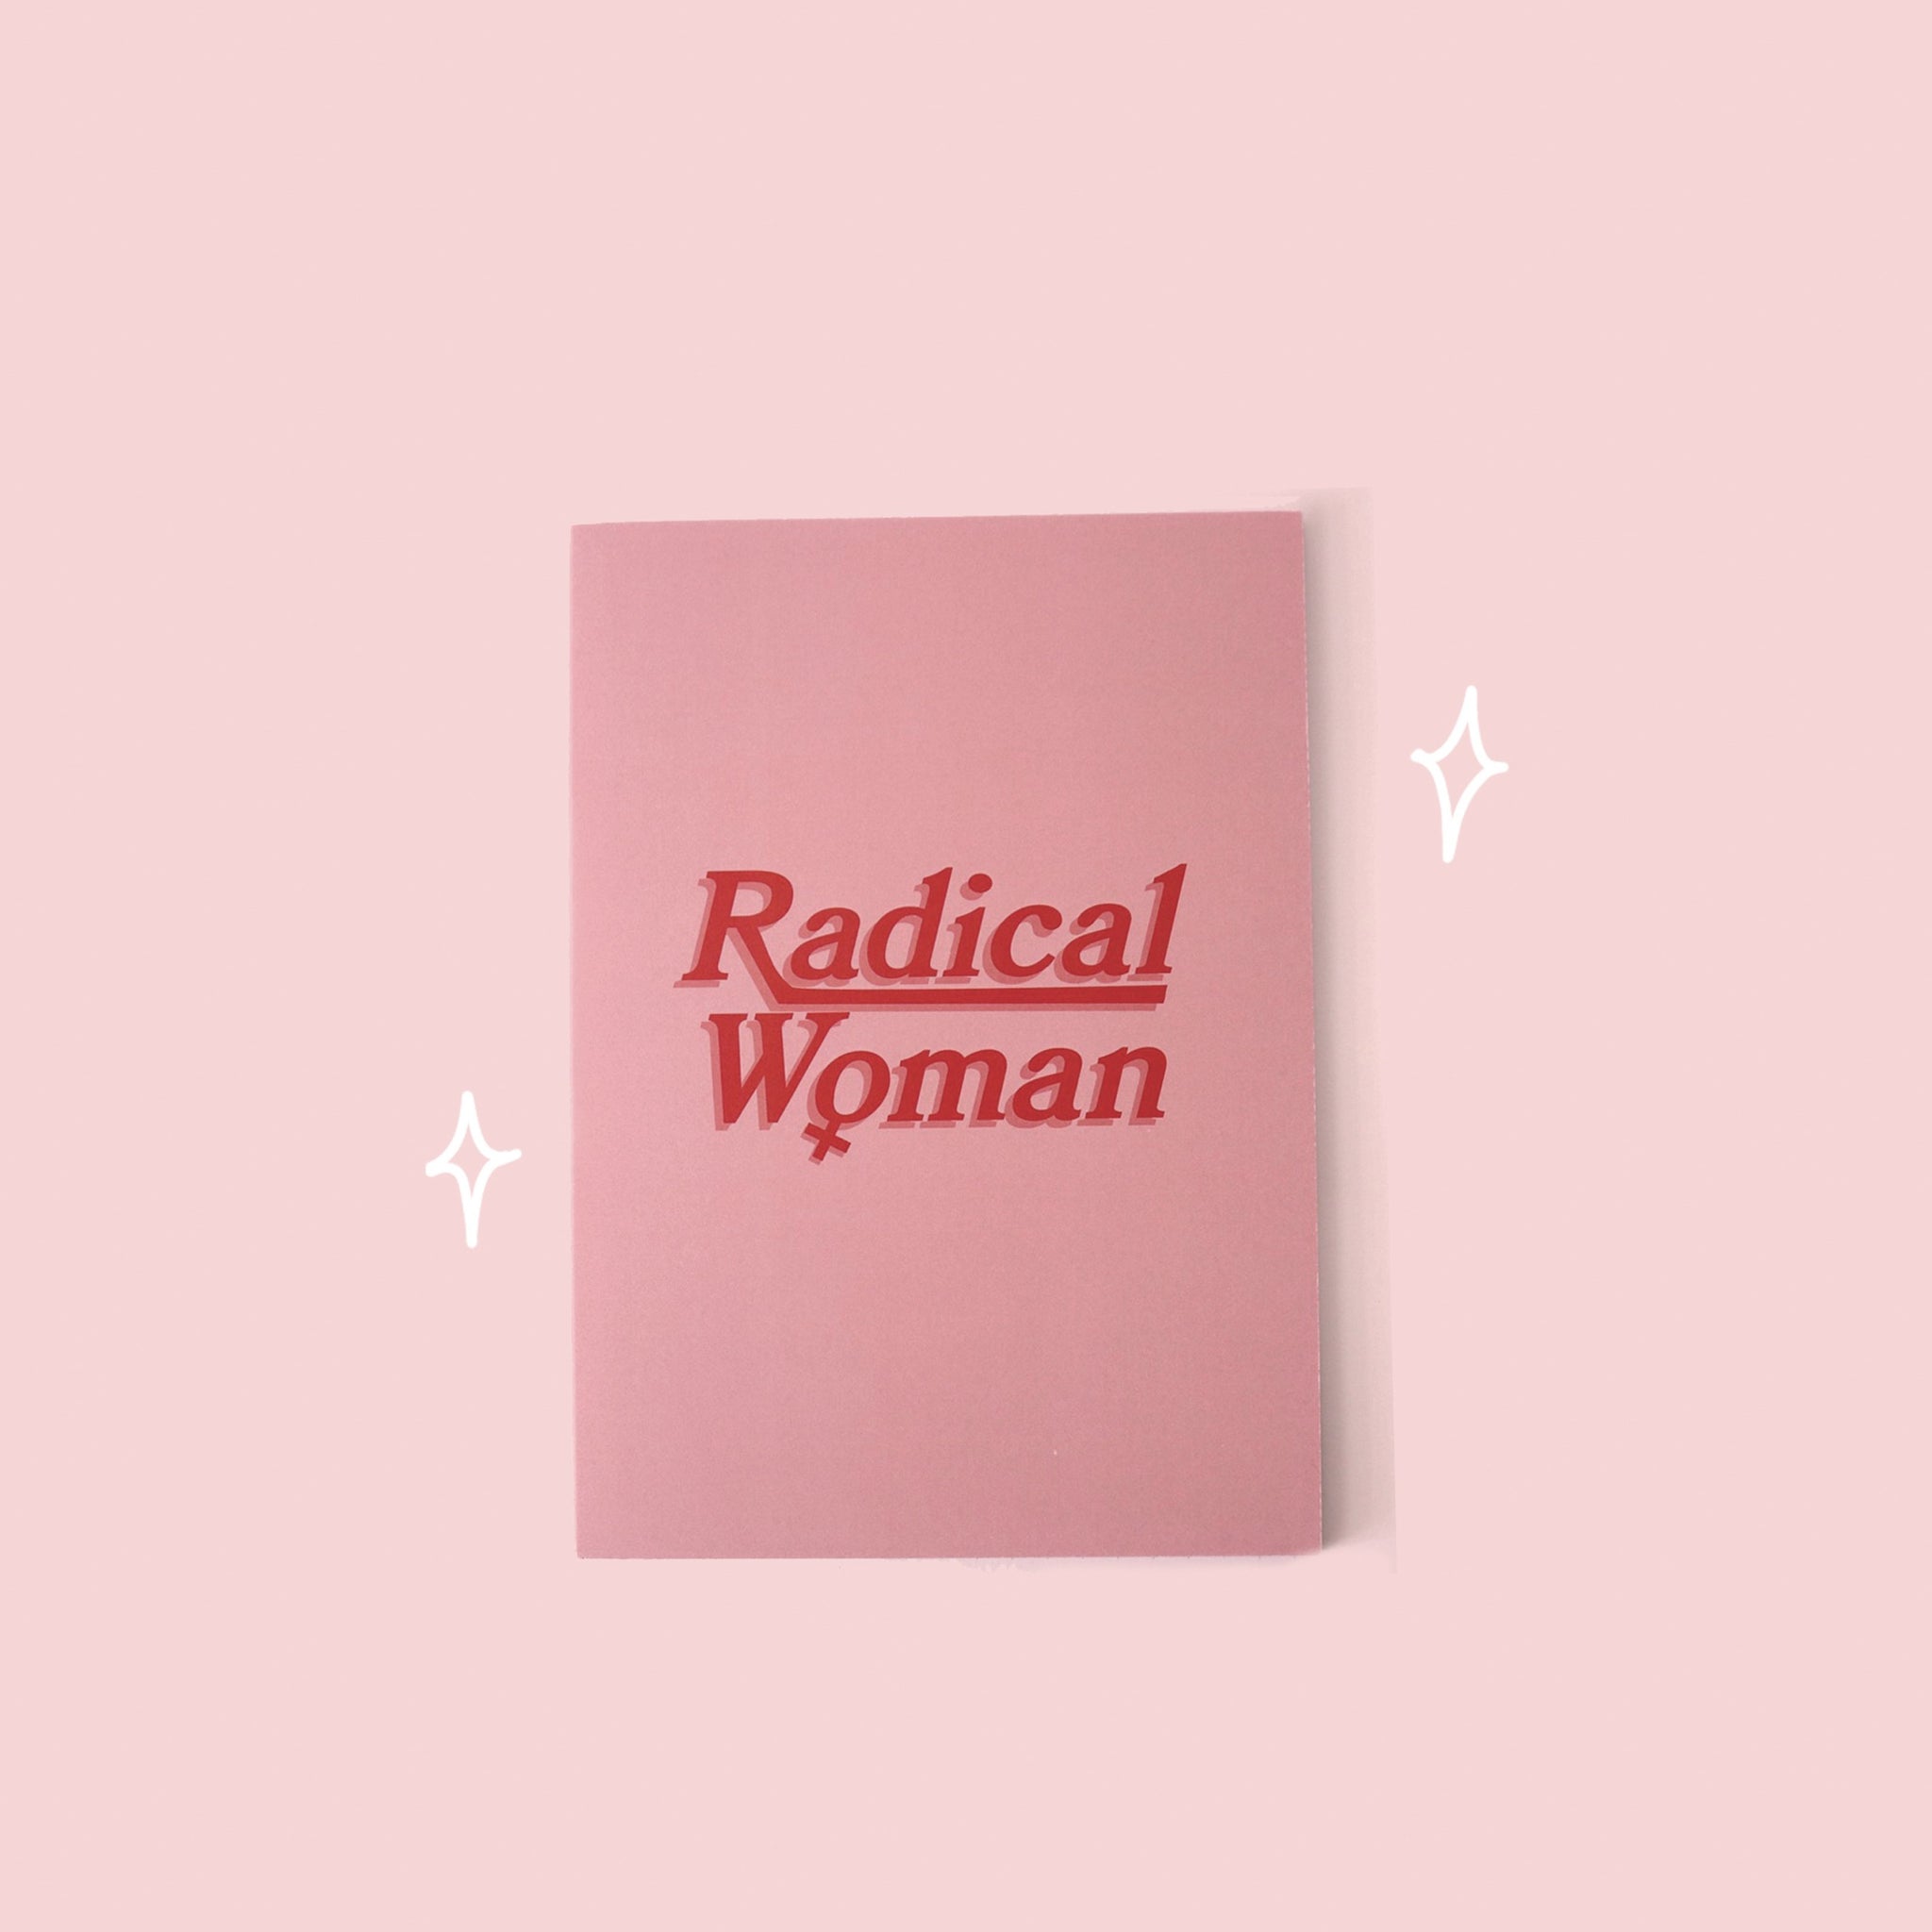 image of a pink whatmabeldid notebook with a slogan saying 'radical woman' in red